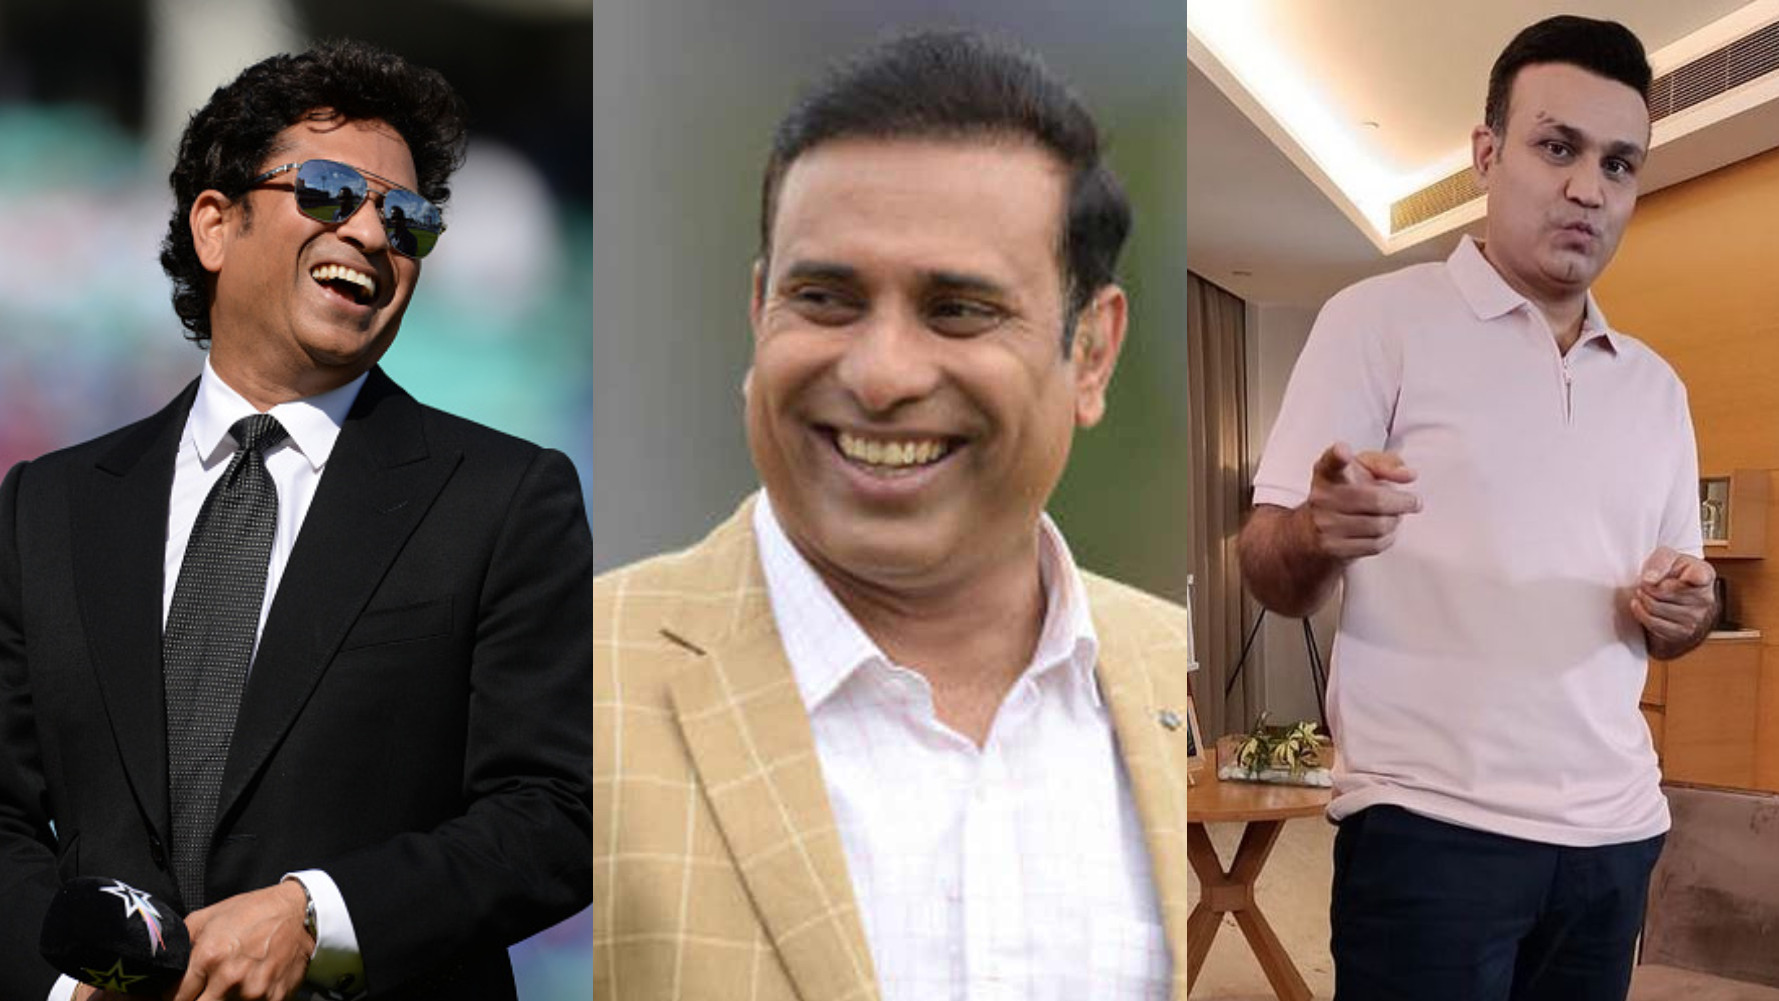 VVS Laxman celebrates his 47th birthday; receives wishes from Indian cricket fraternity